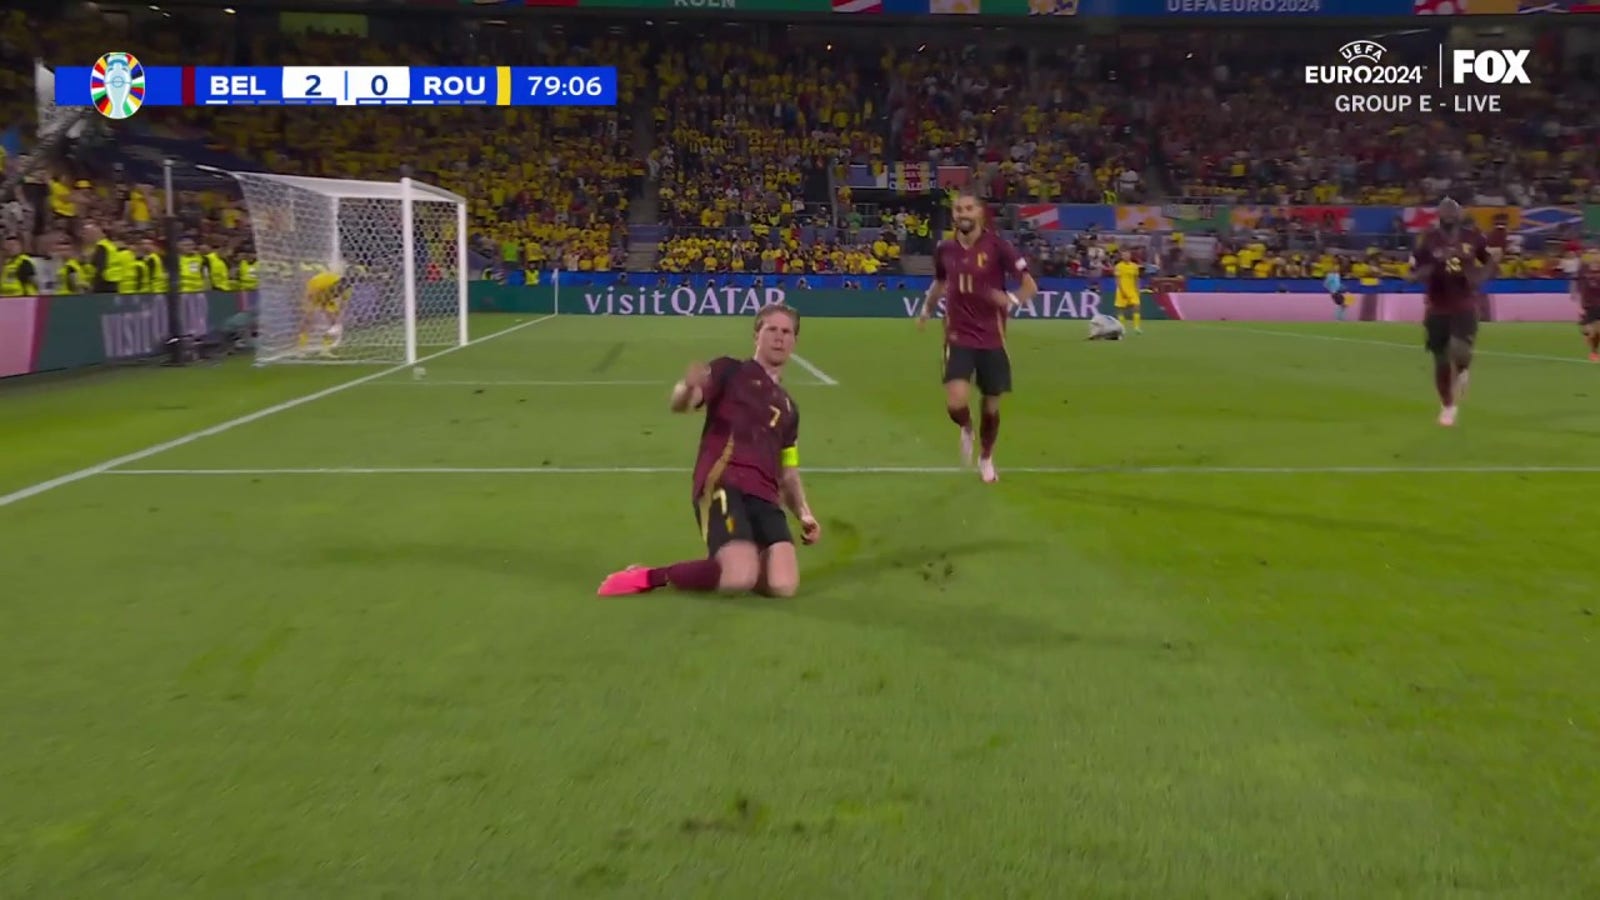 Kevin De Bruyne slots in a goal in 80' to give Belgium a 2-0 lead over Romania